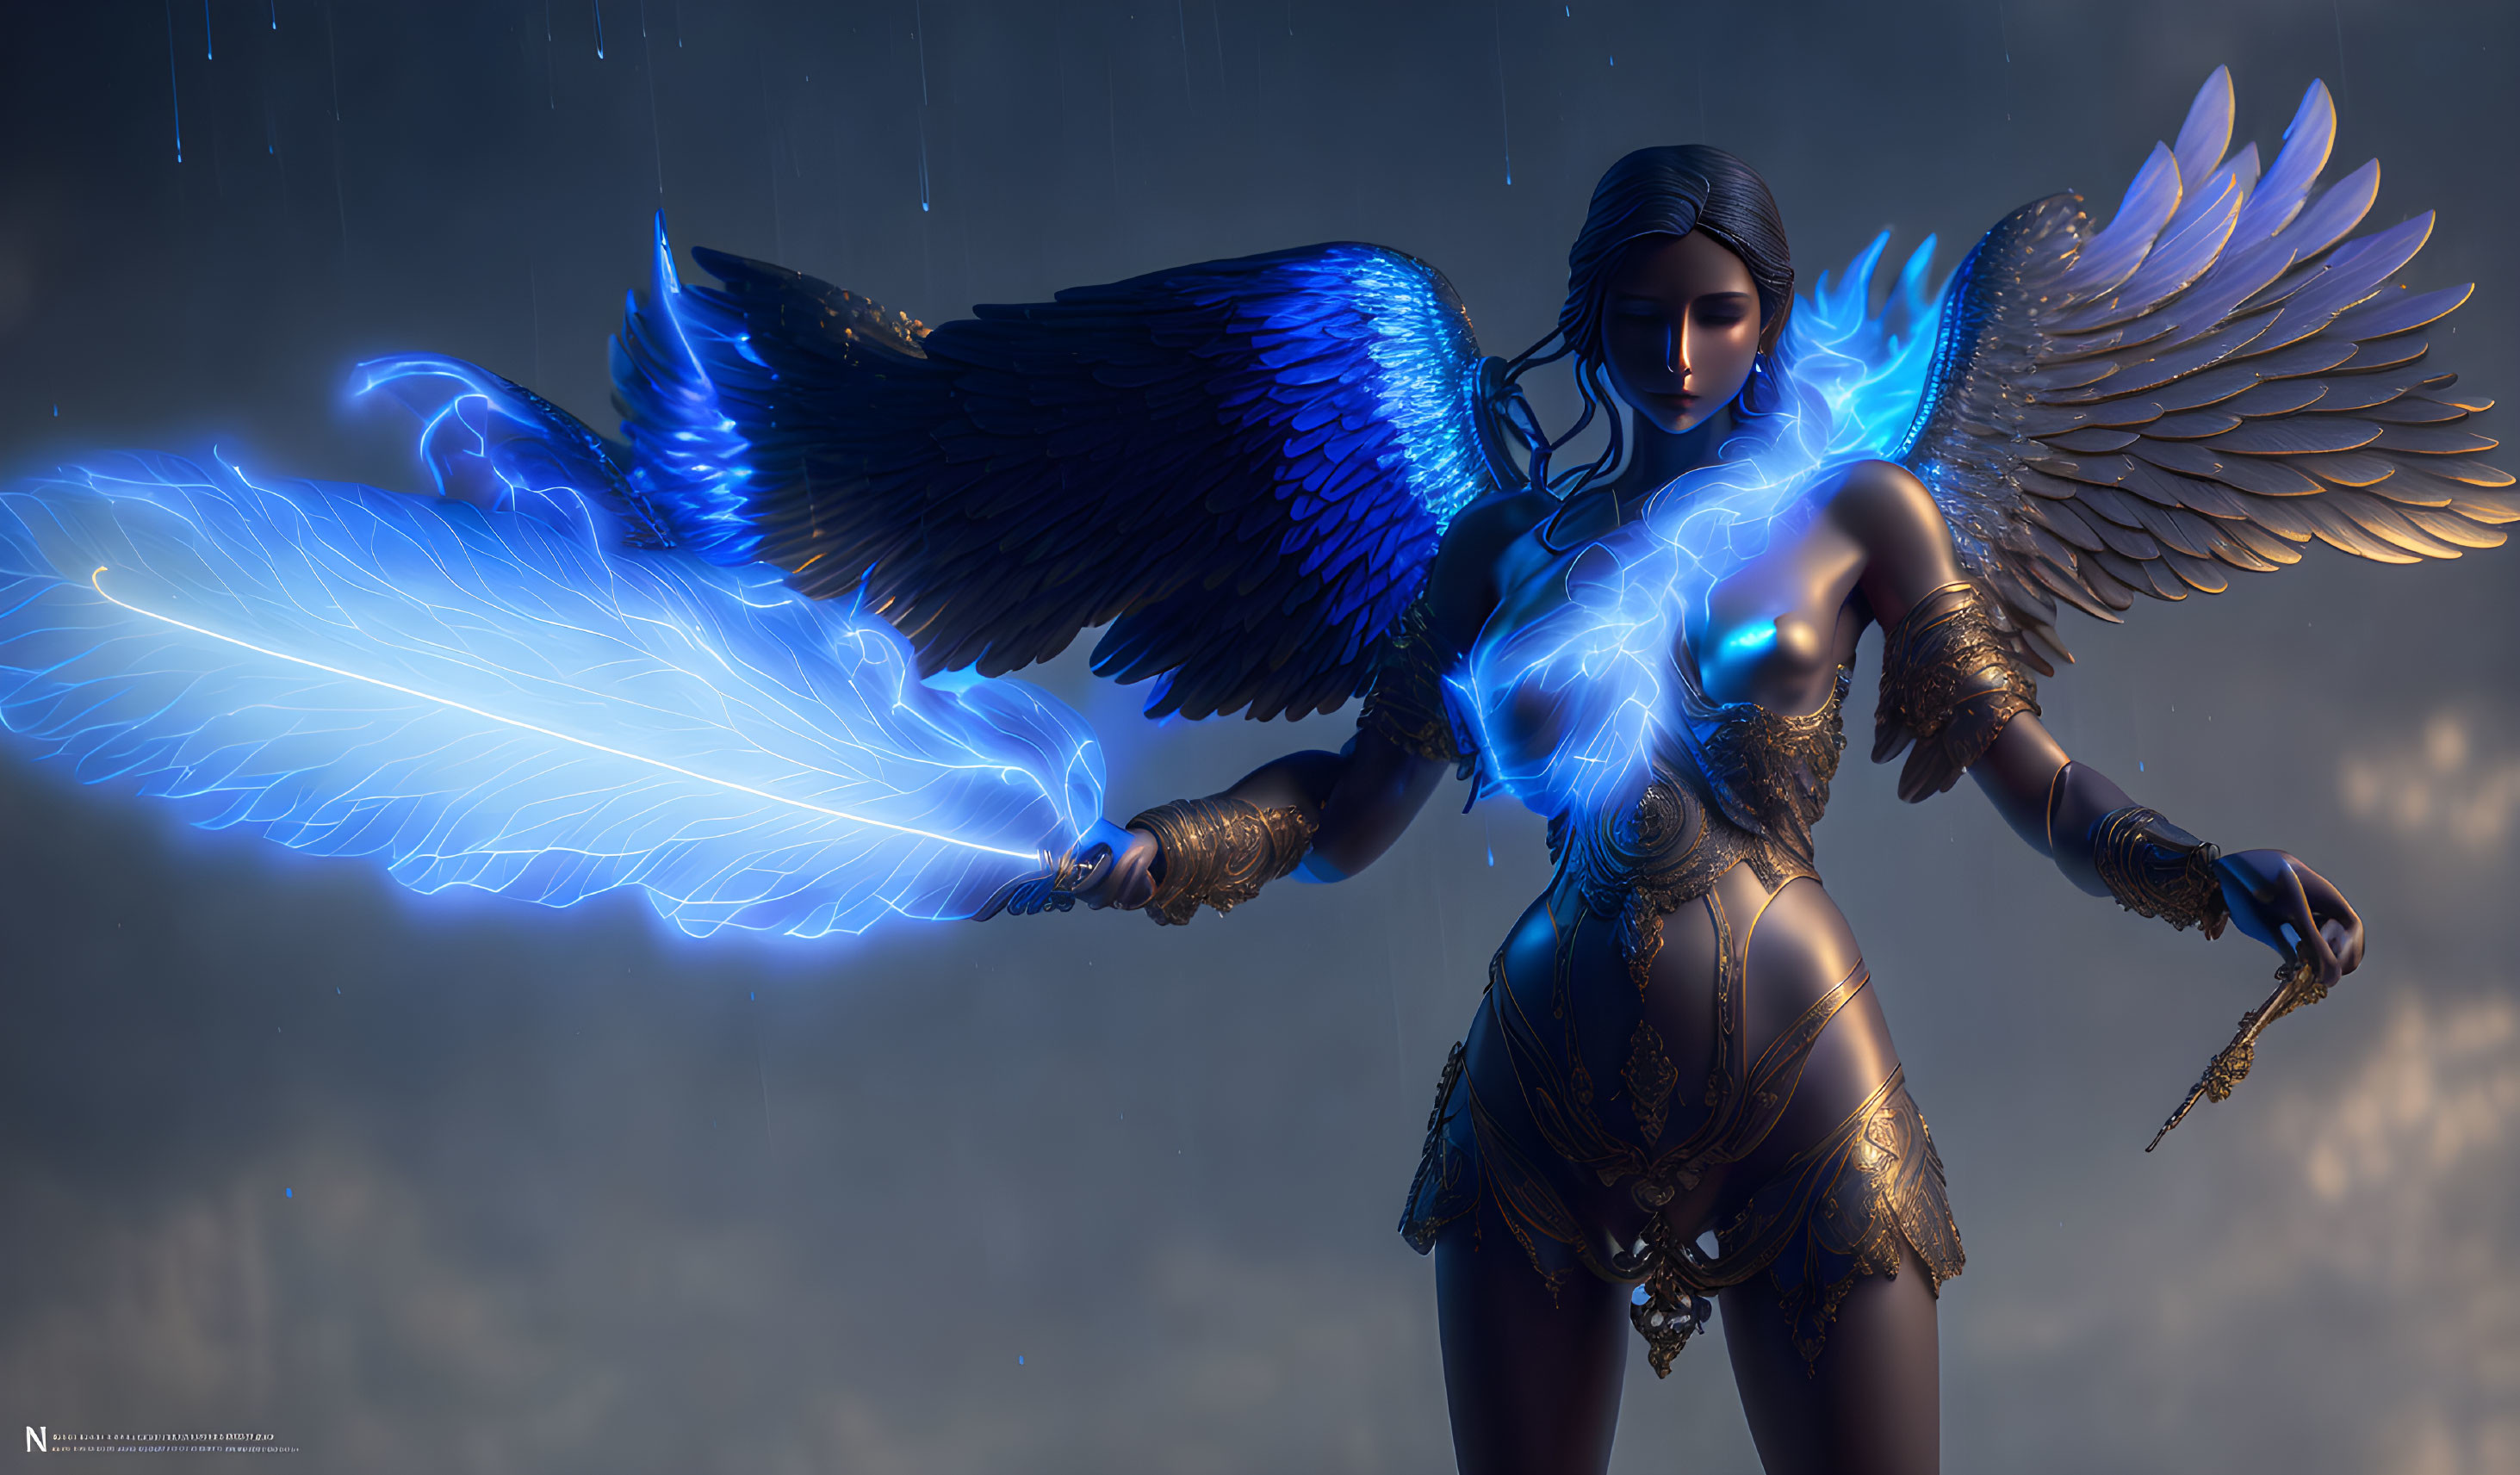 Digital artwork of female figure with glowing wings and golden armor on dark background.